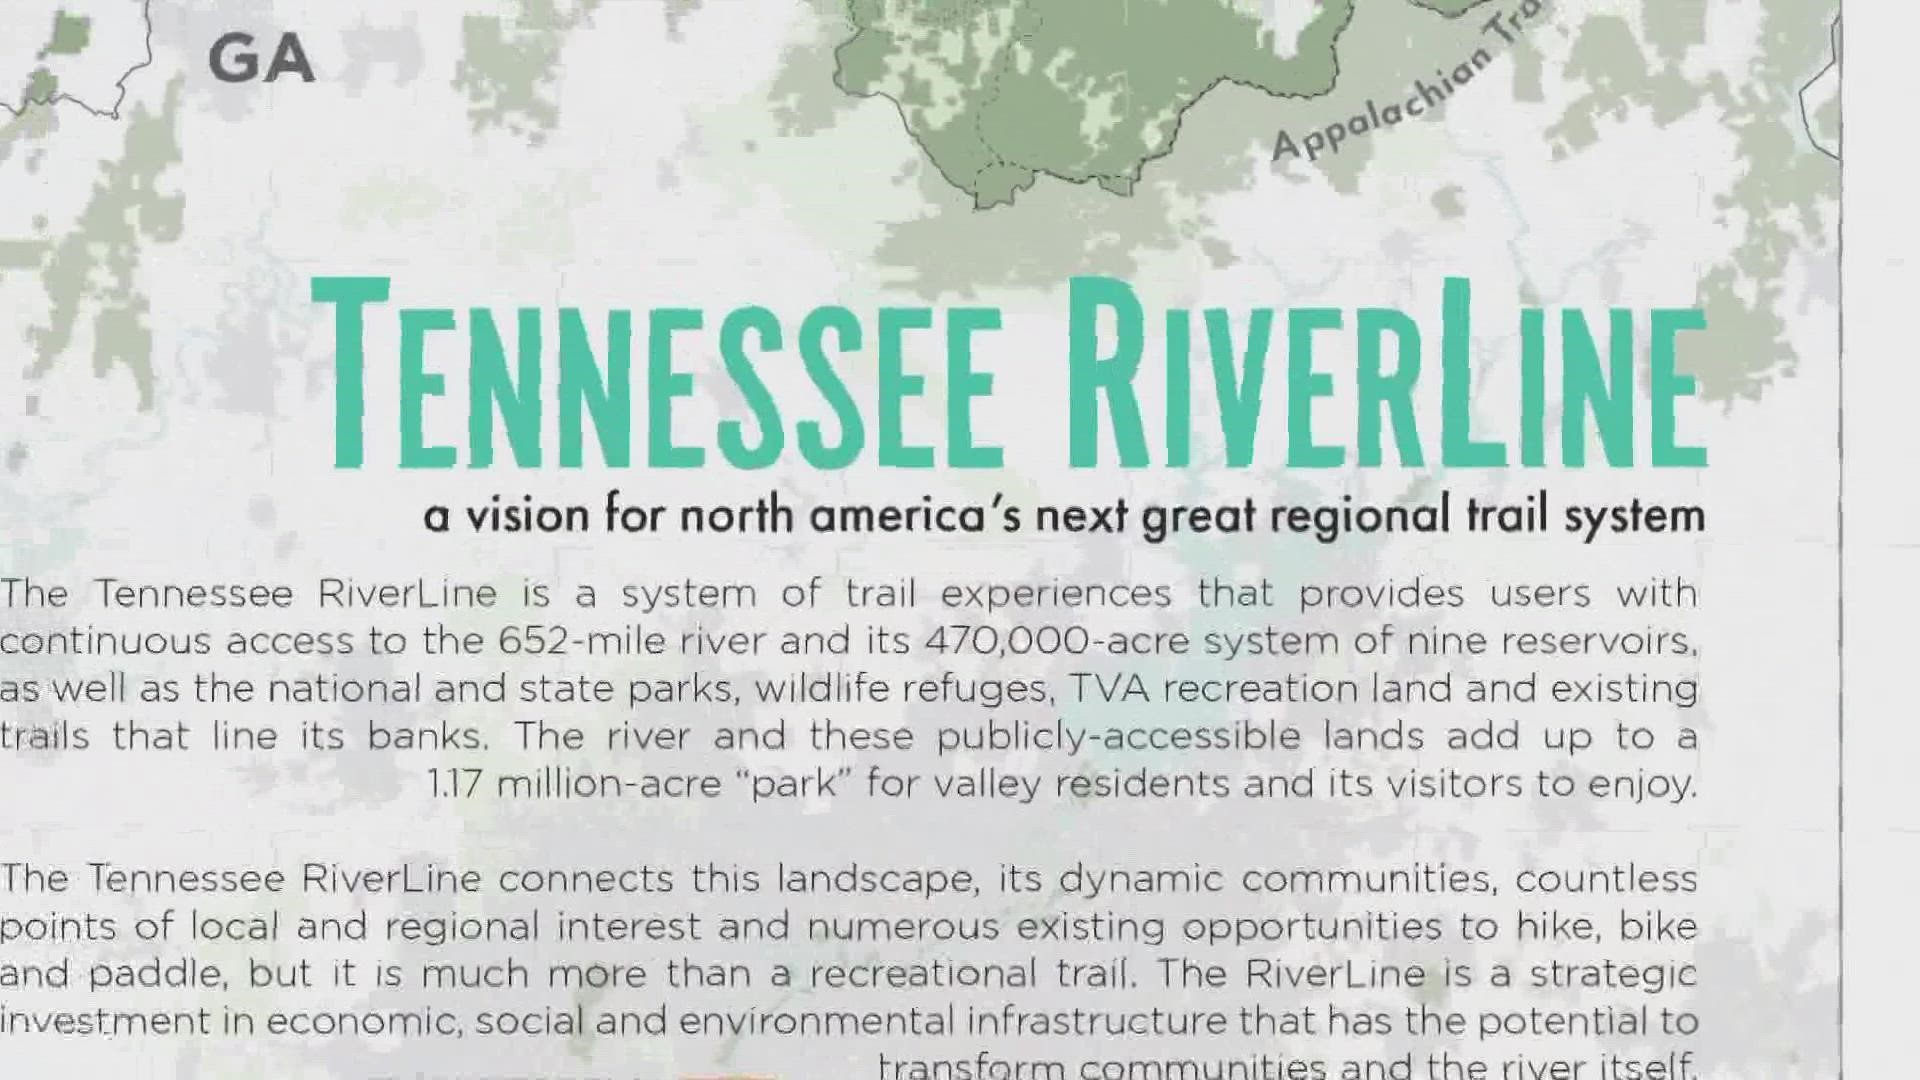 The Tennessee RiverLine is a system of connected trails and rivers connecting communities in Tennessee, Alabama, Mississippi and Kentucky.